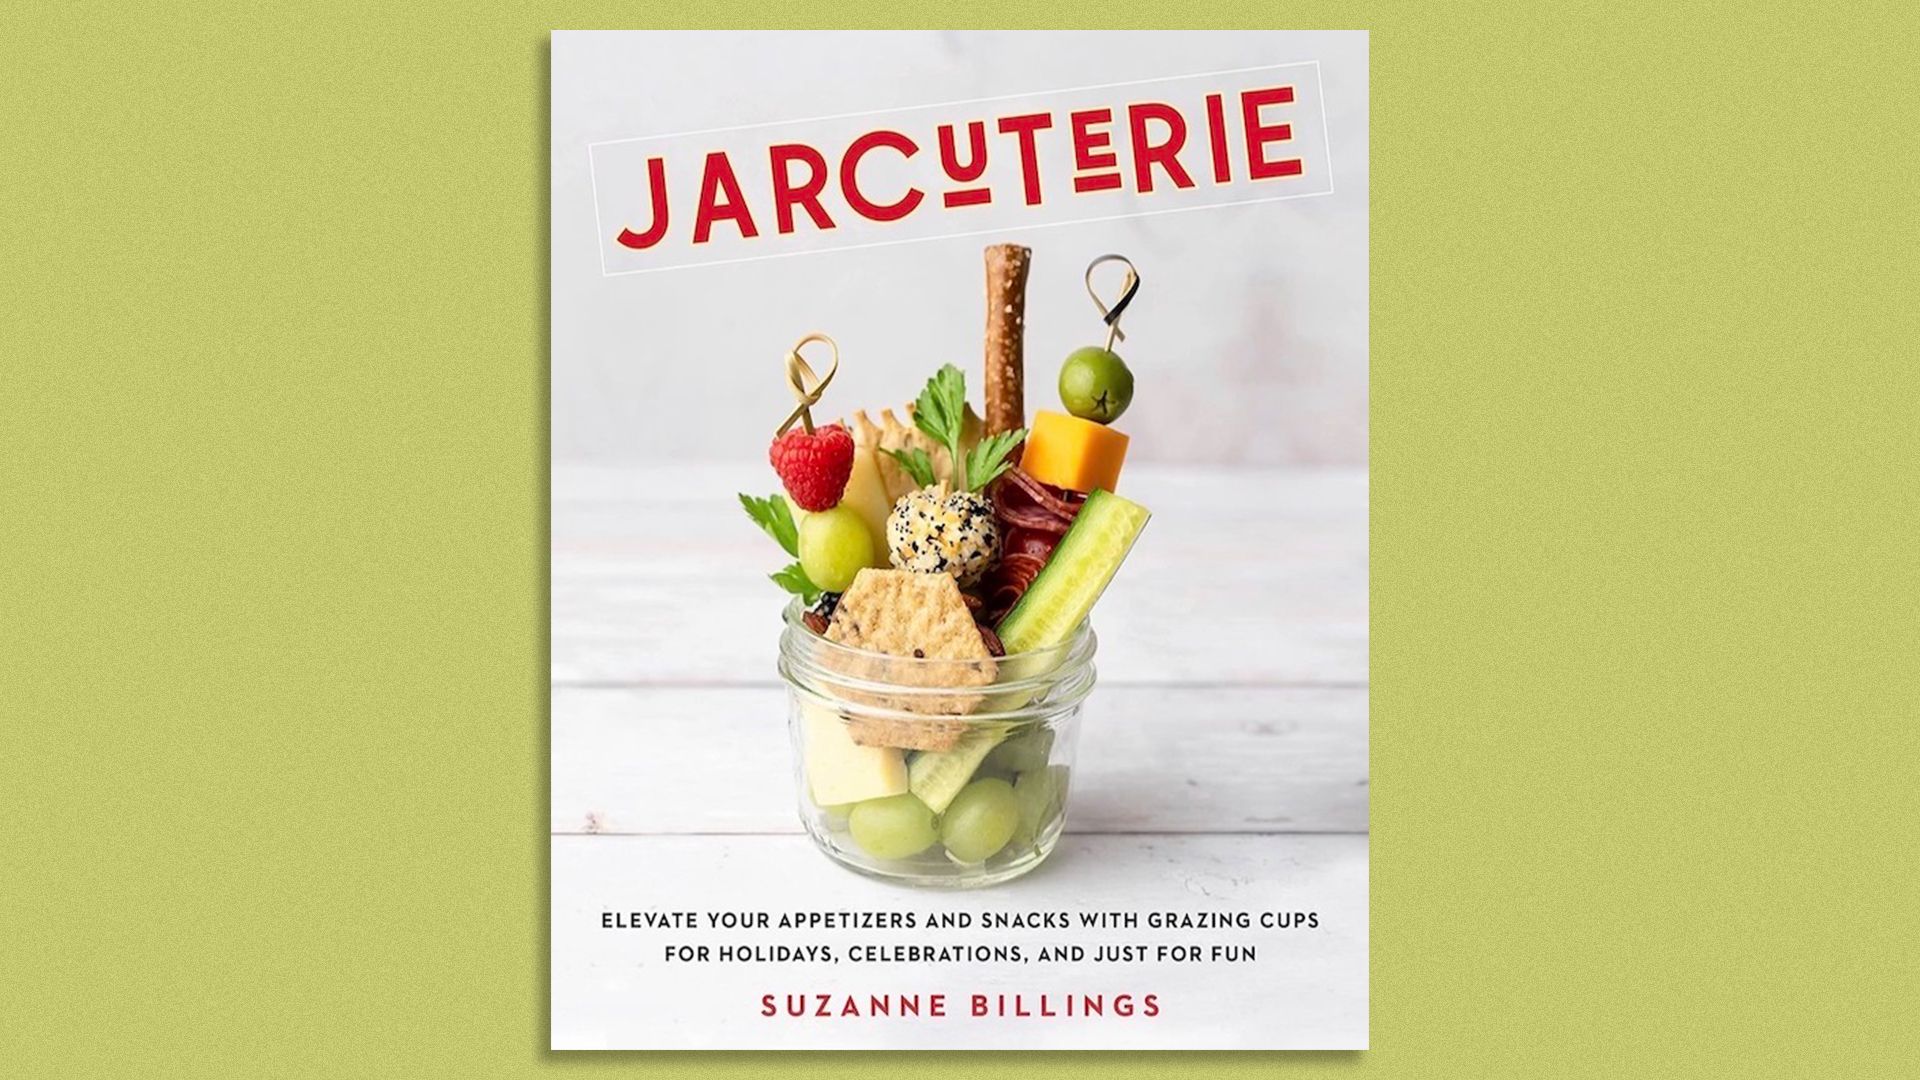 Cover art of a book called Jarcuterie by Suzanne Billings.